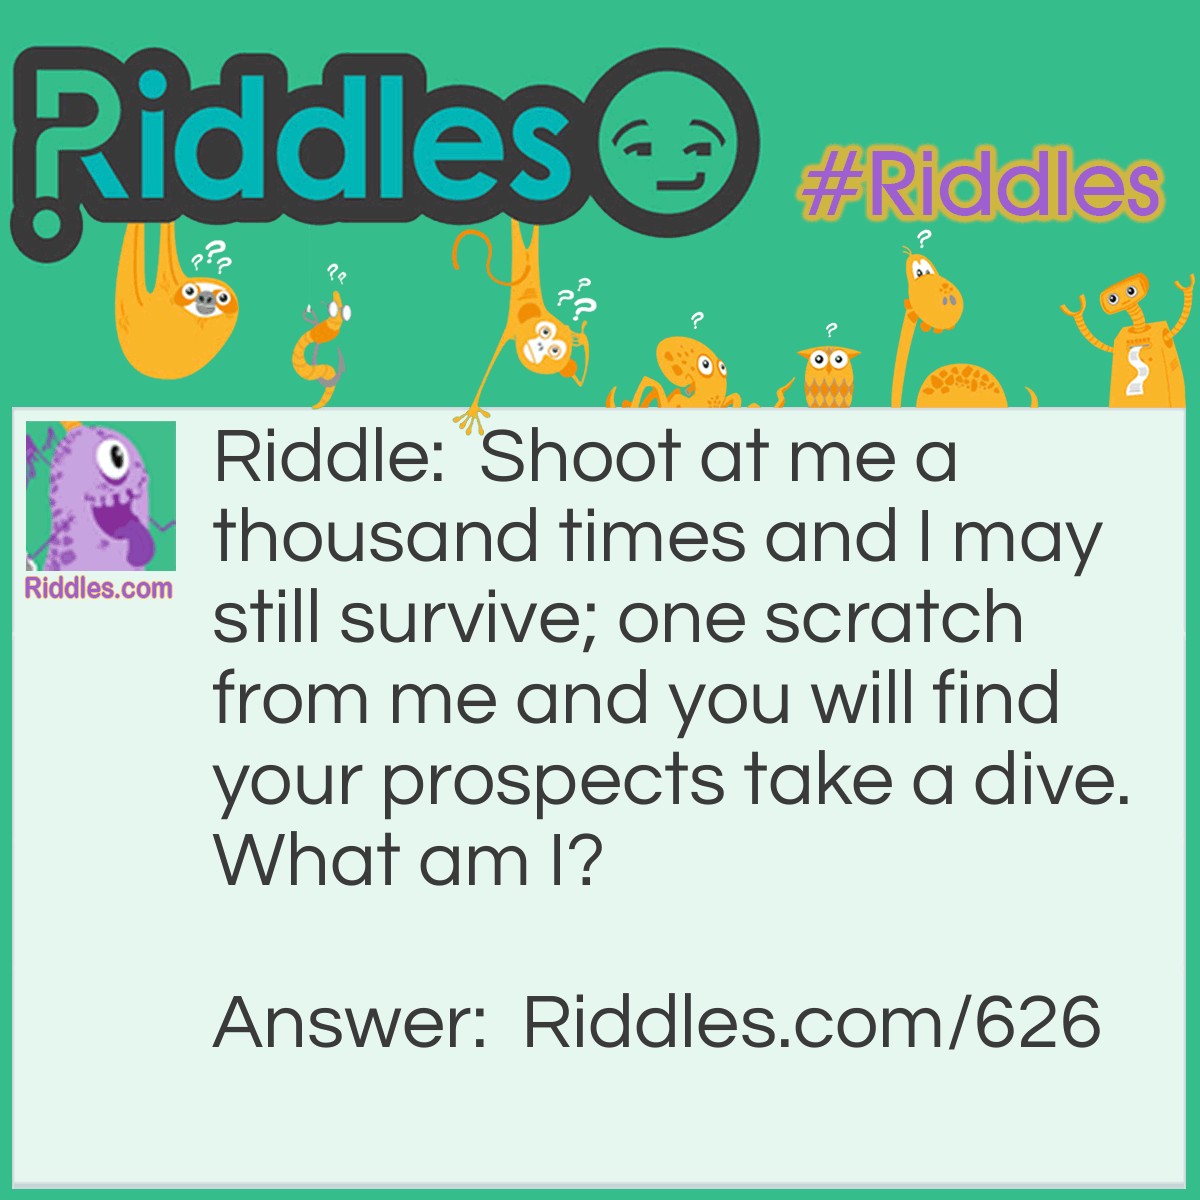 Riddle: Shoot at me a thousand times and I may still survive; one scratch from me and you will find your prospects take a dive.
What am I? Answer: An Eightball.